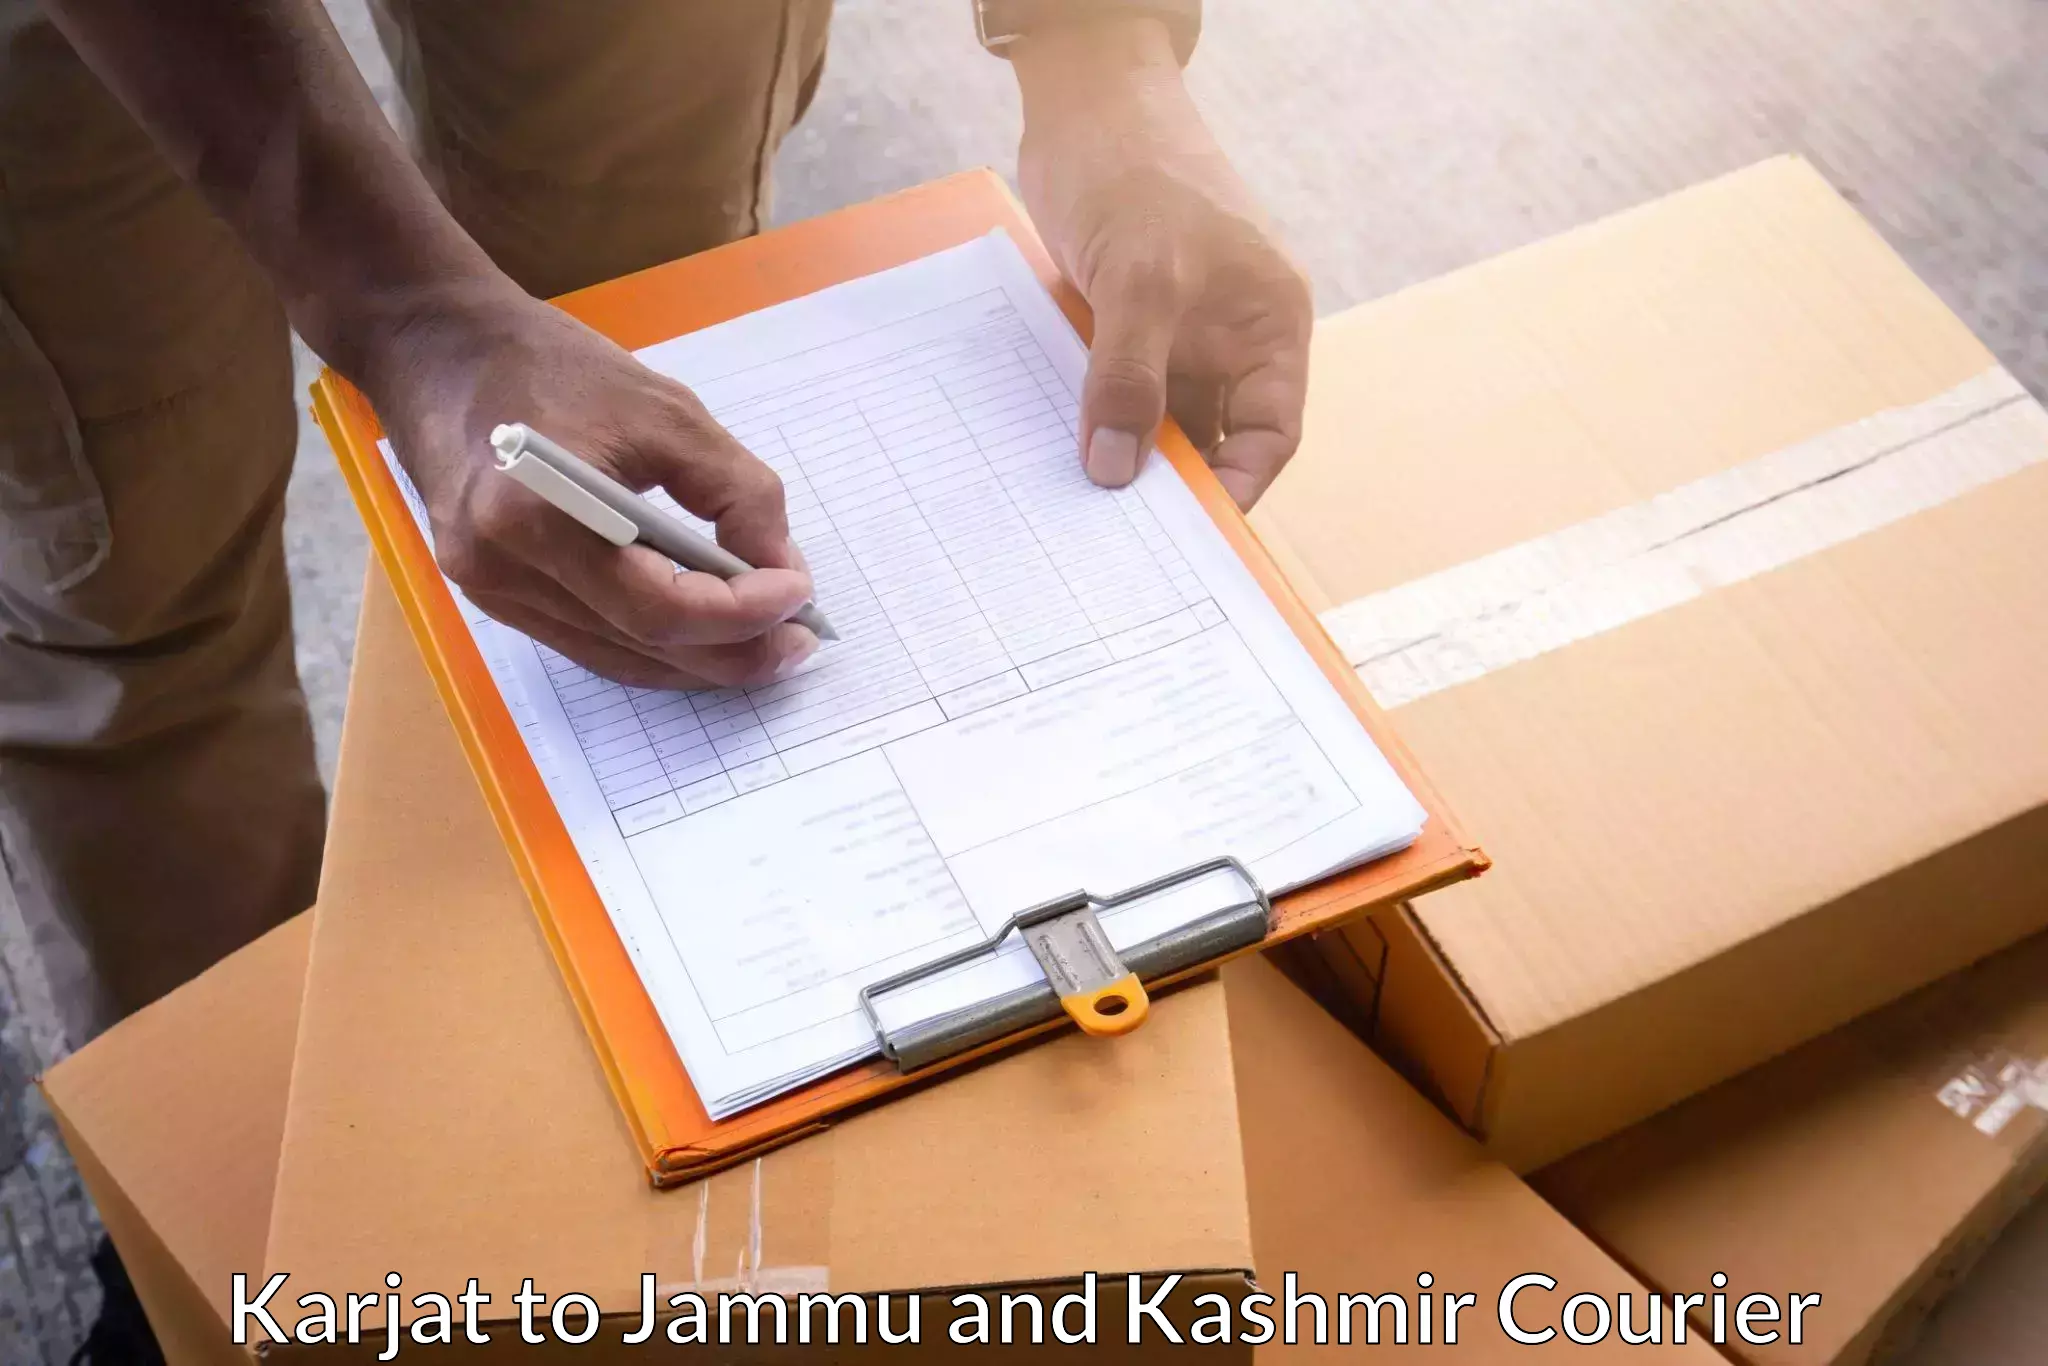 Automated shipping in Karjat to Jammu and Kashmir